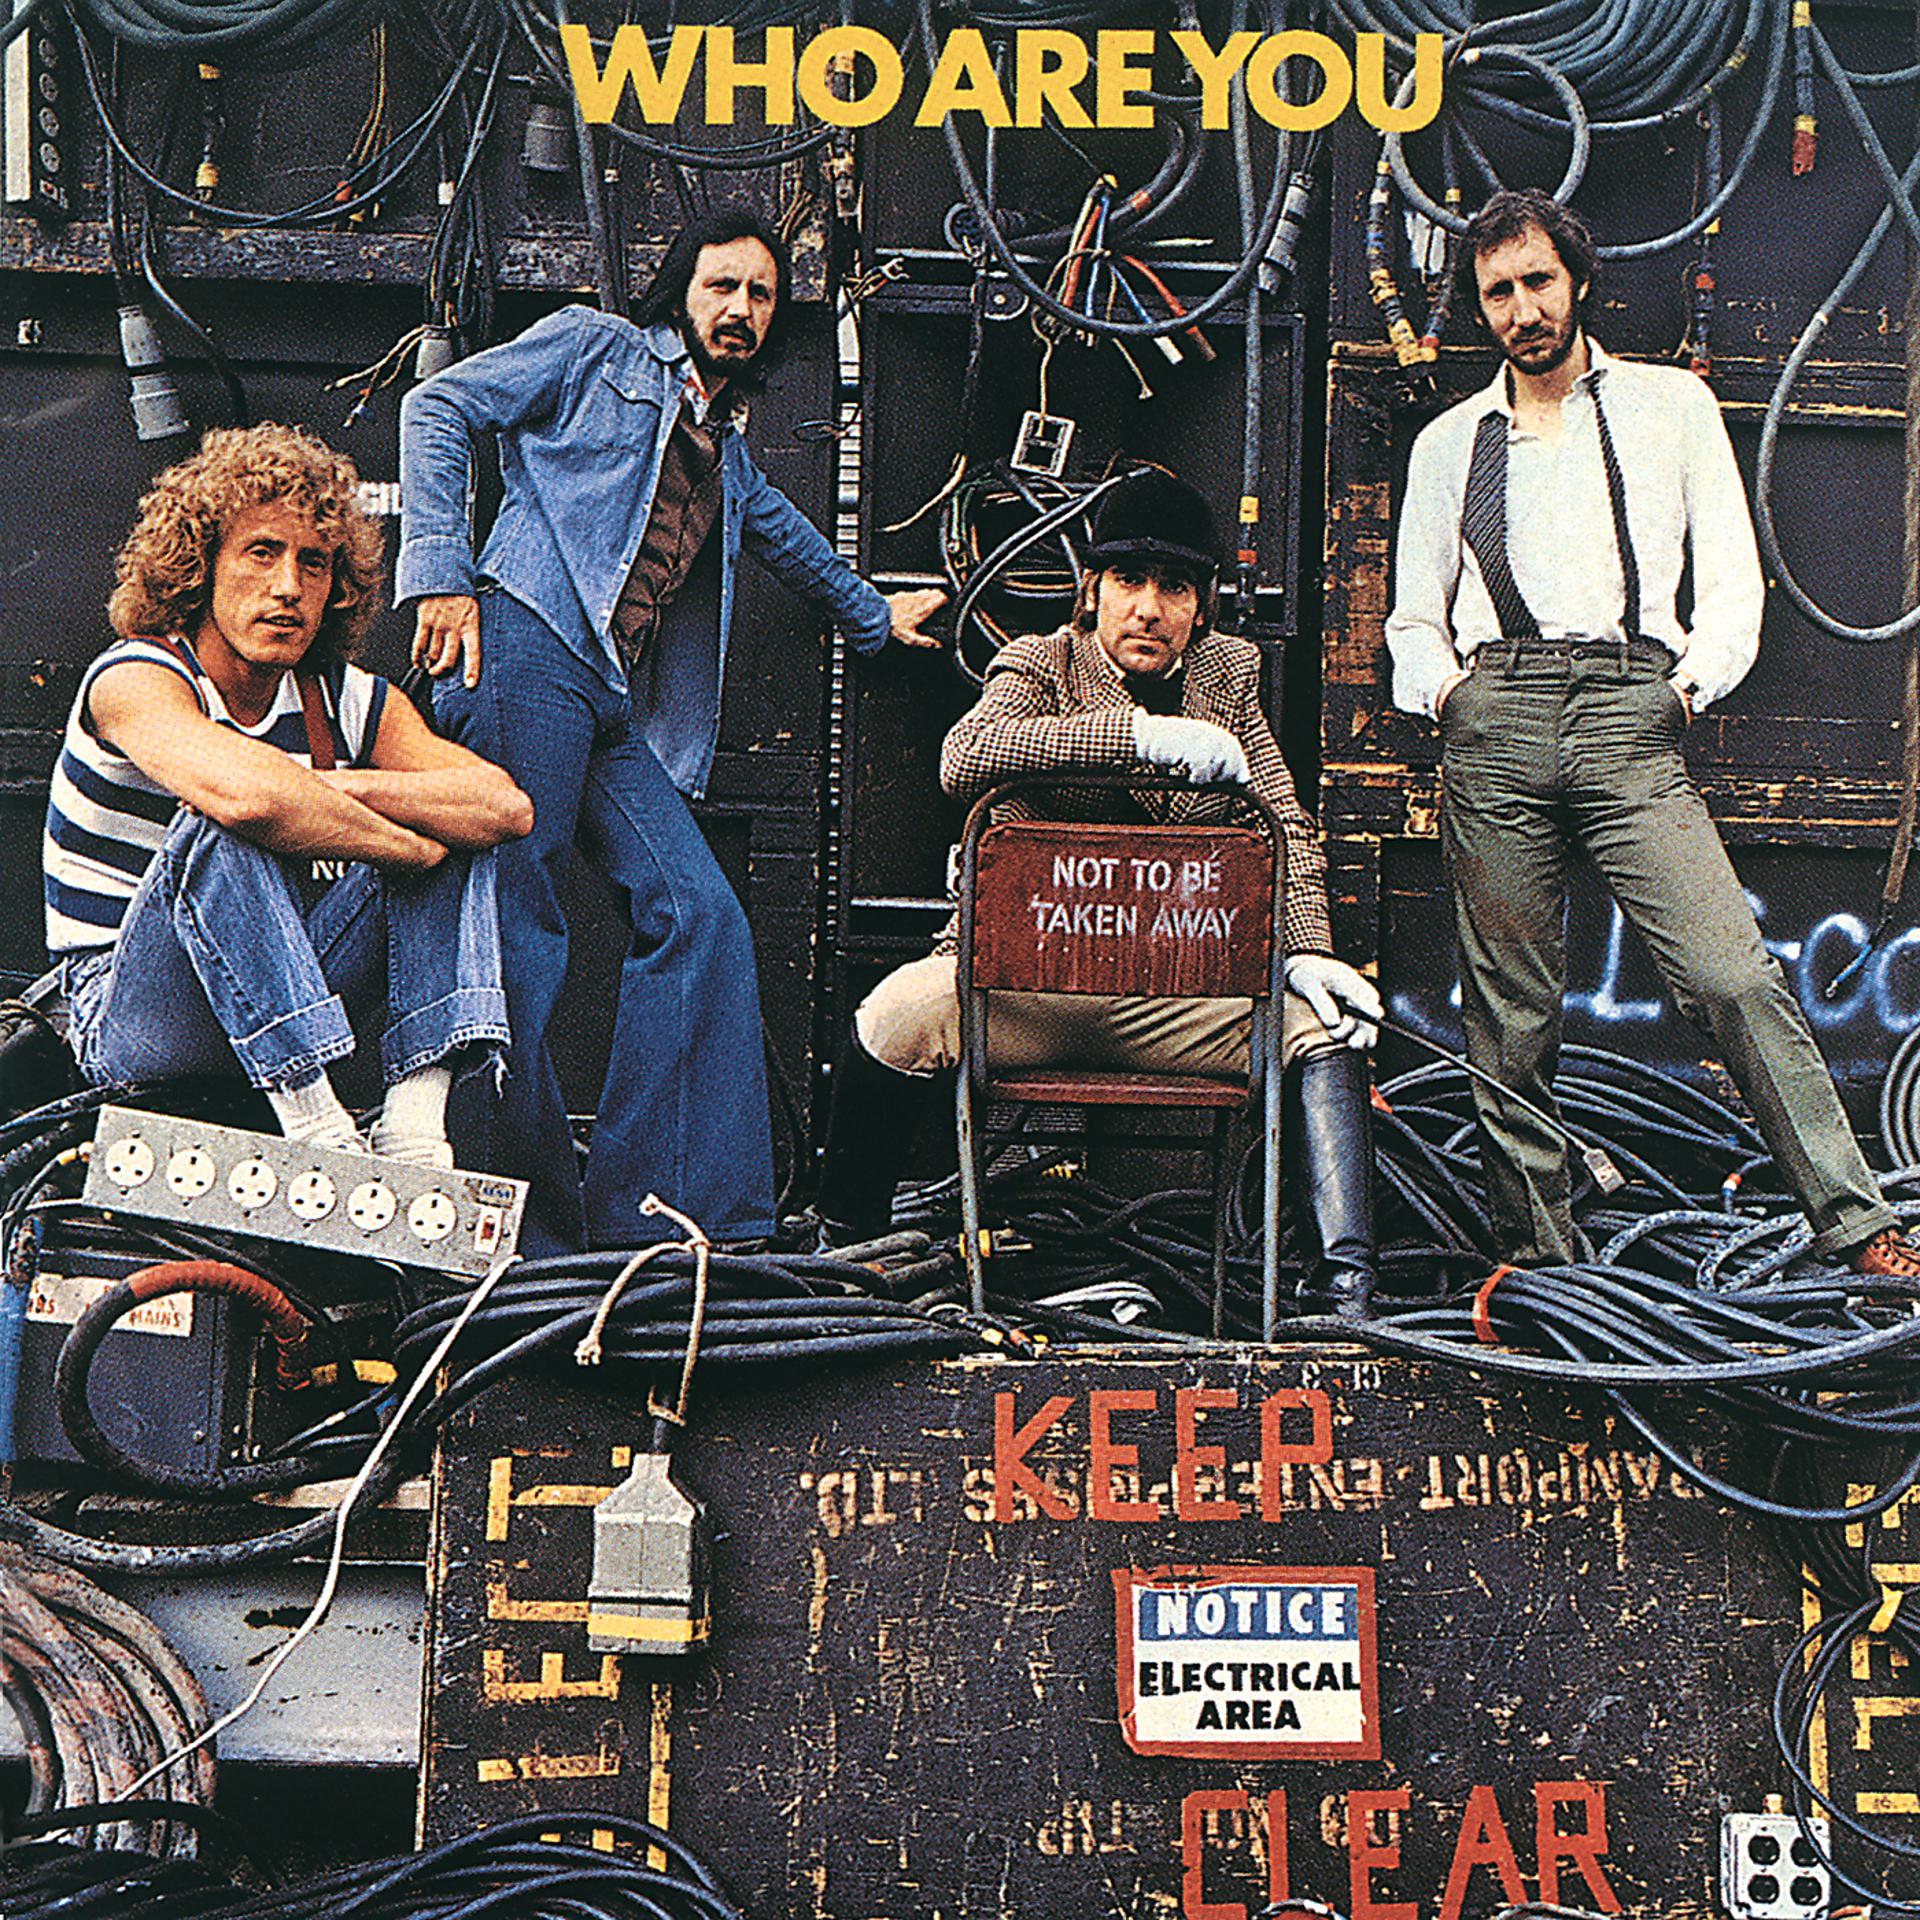 The who who are you 1978. Who are you альбом. The who who are you 1978 CD. Известные обложки альбомов. The who collection the who